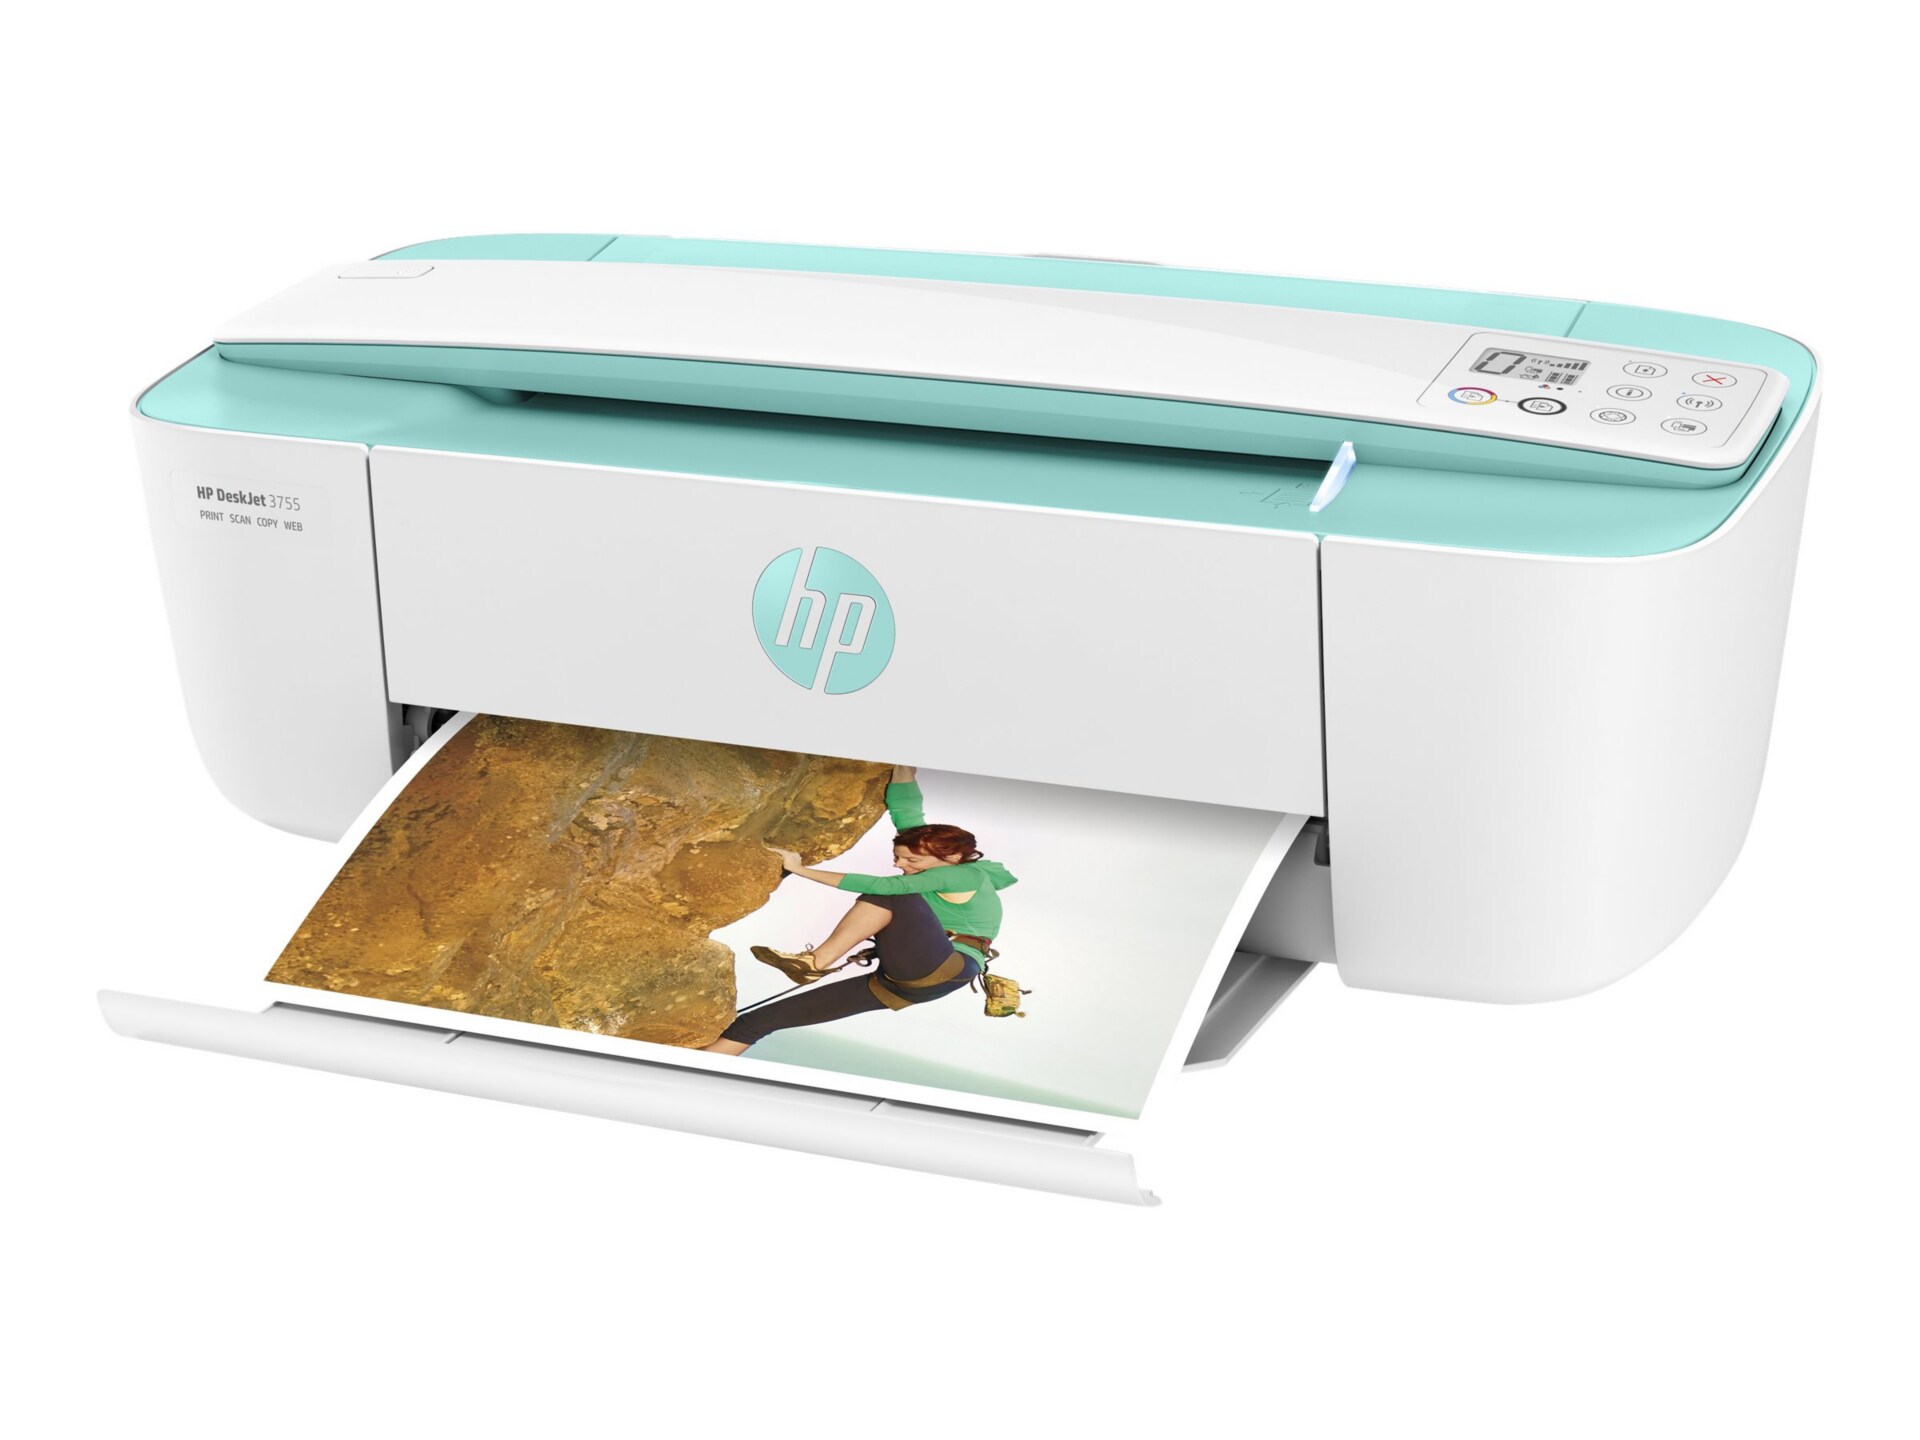 HP Deskjet 3755 All-in-One - multifunction printer color HP Instant Ink - J9V92A#B1H - All-in-One Printers - CDW.com